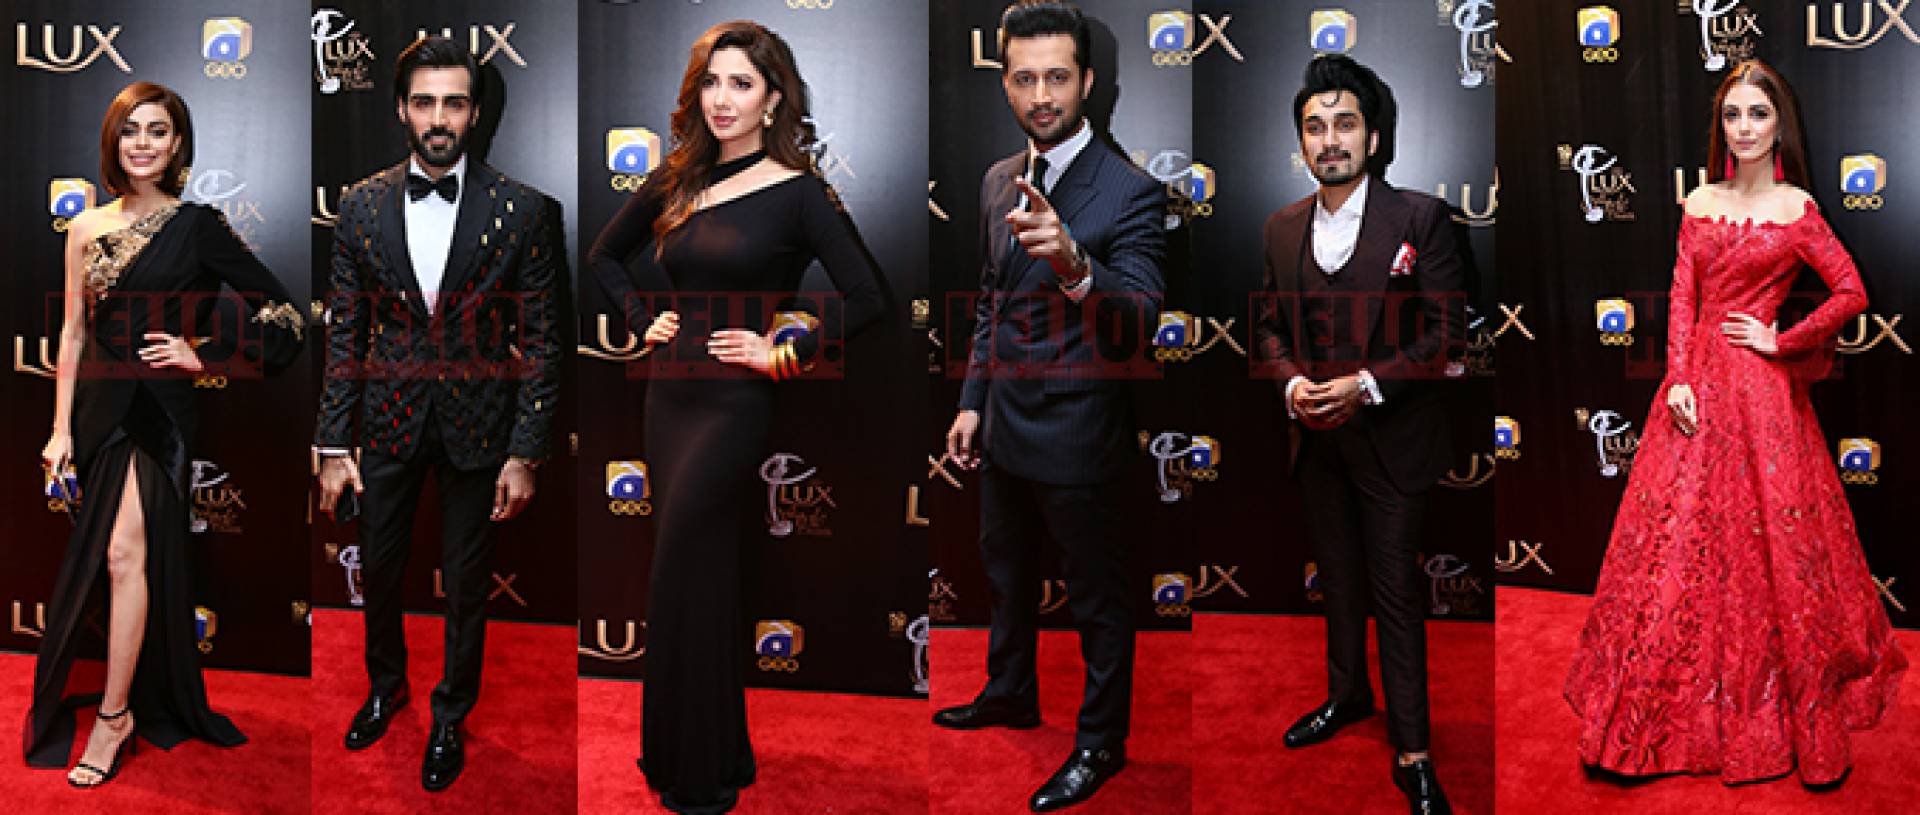 From Best To Worst - LUX Style Awards Red Carpet In A Nutshell!